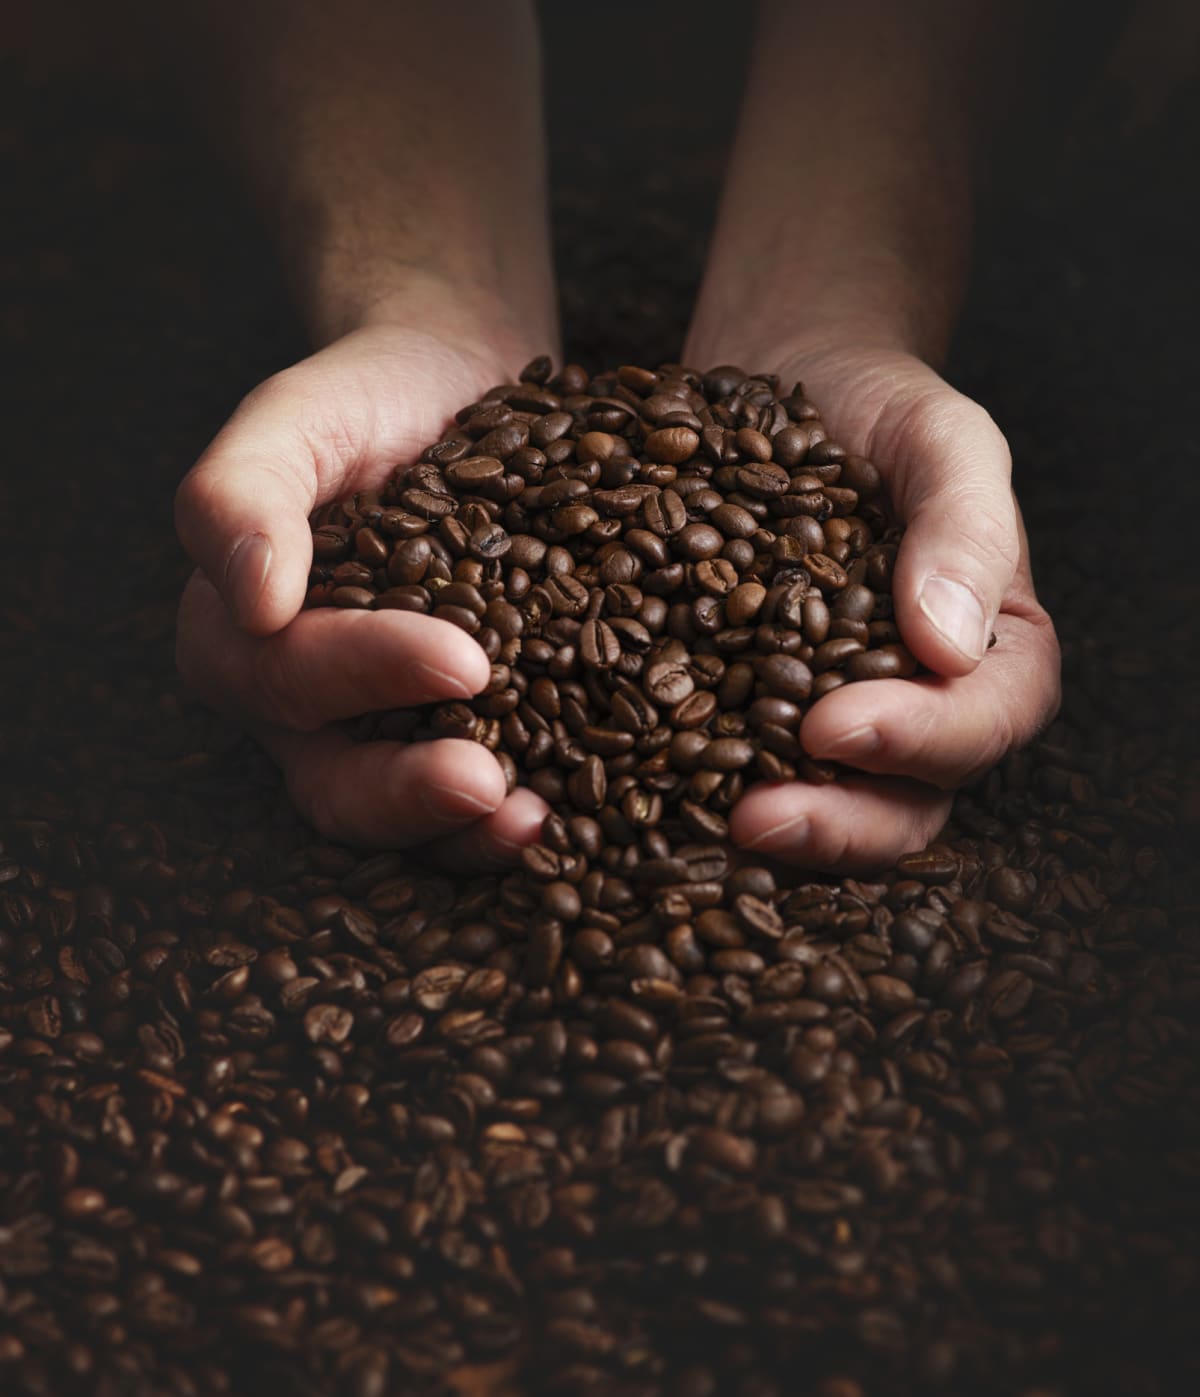 Person with hands full of coffee beans.